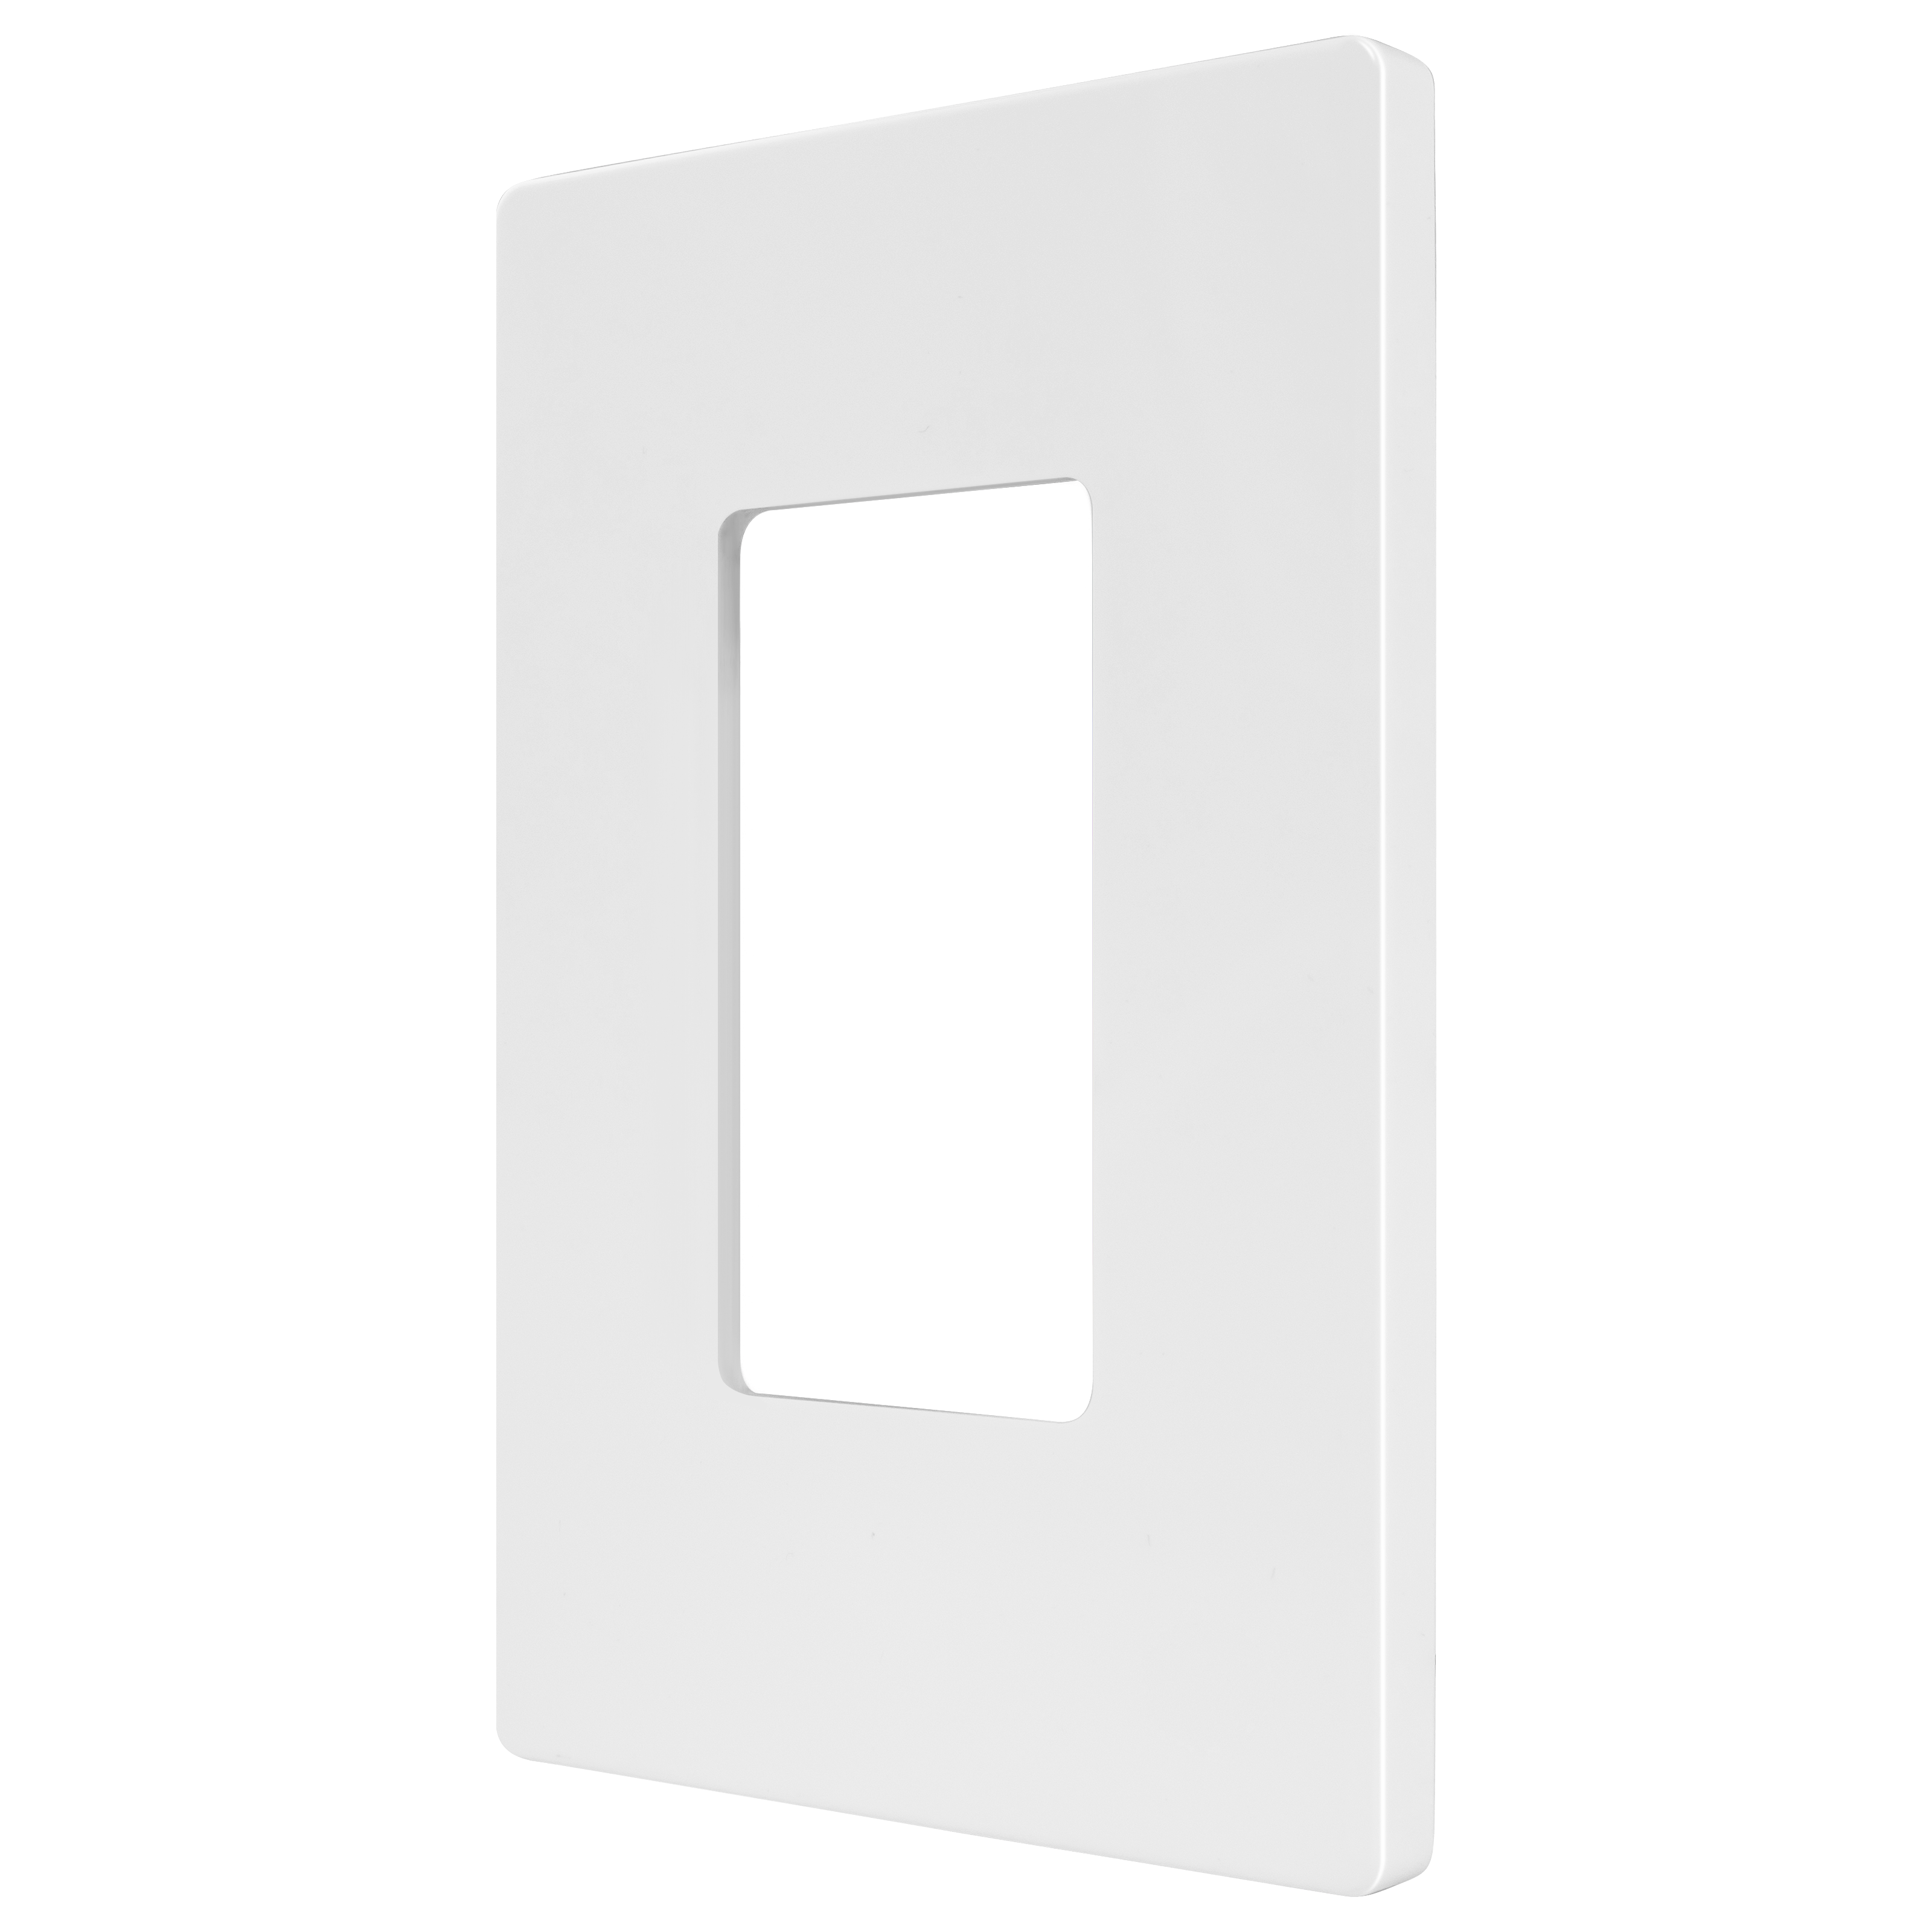 Rêve Collection Luxury Decorator Switch Cover, Screwless Wall Plate